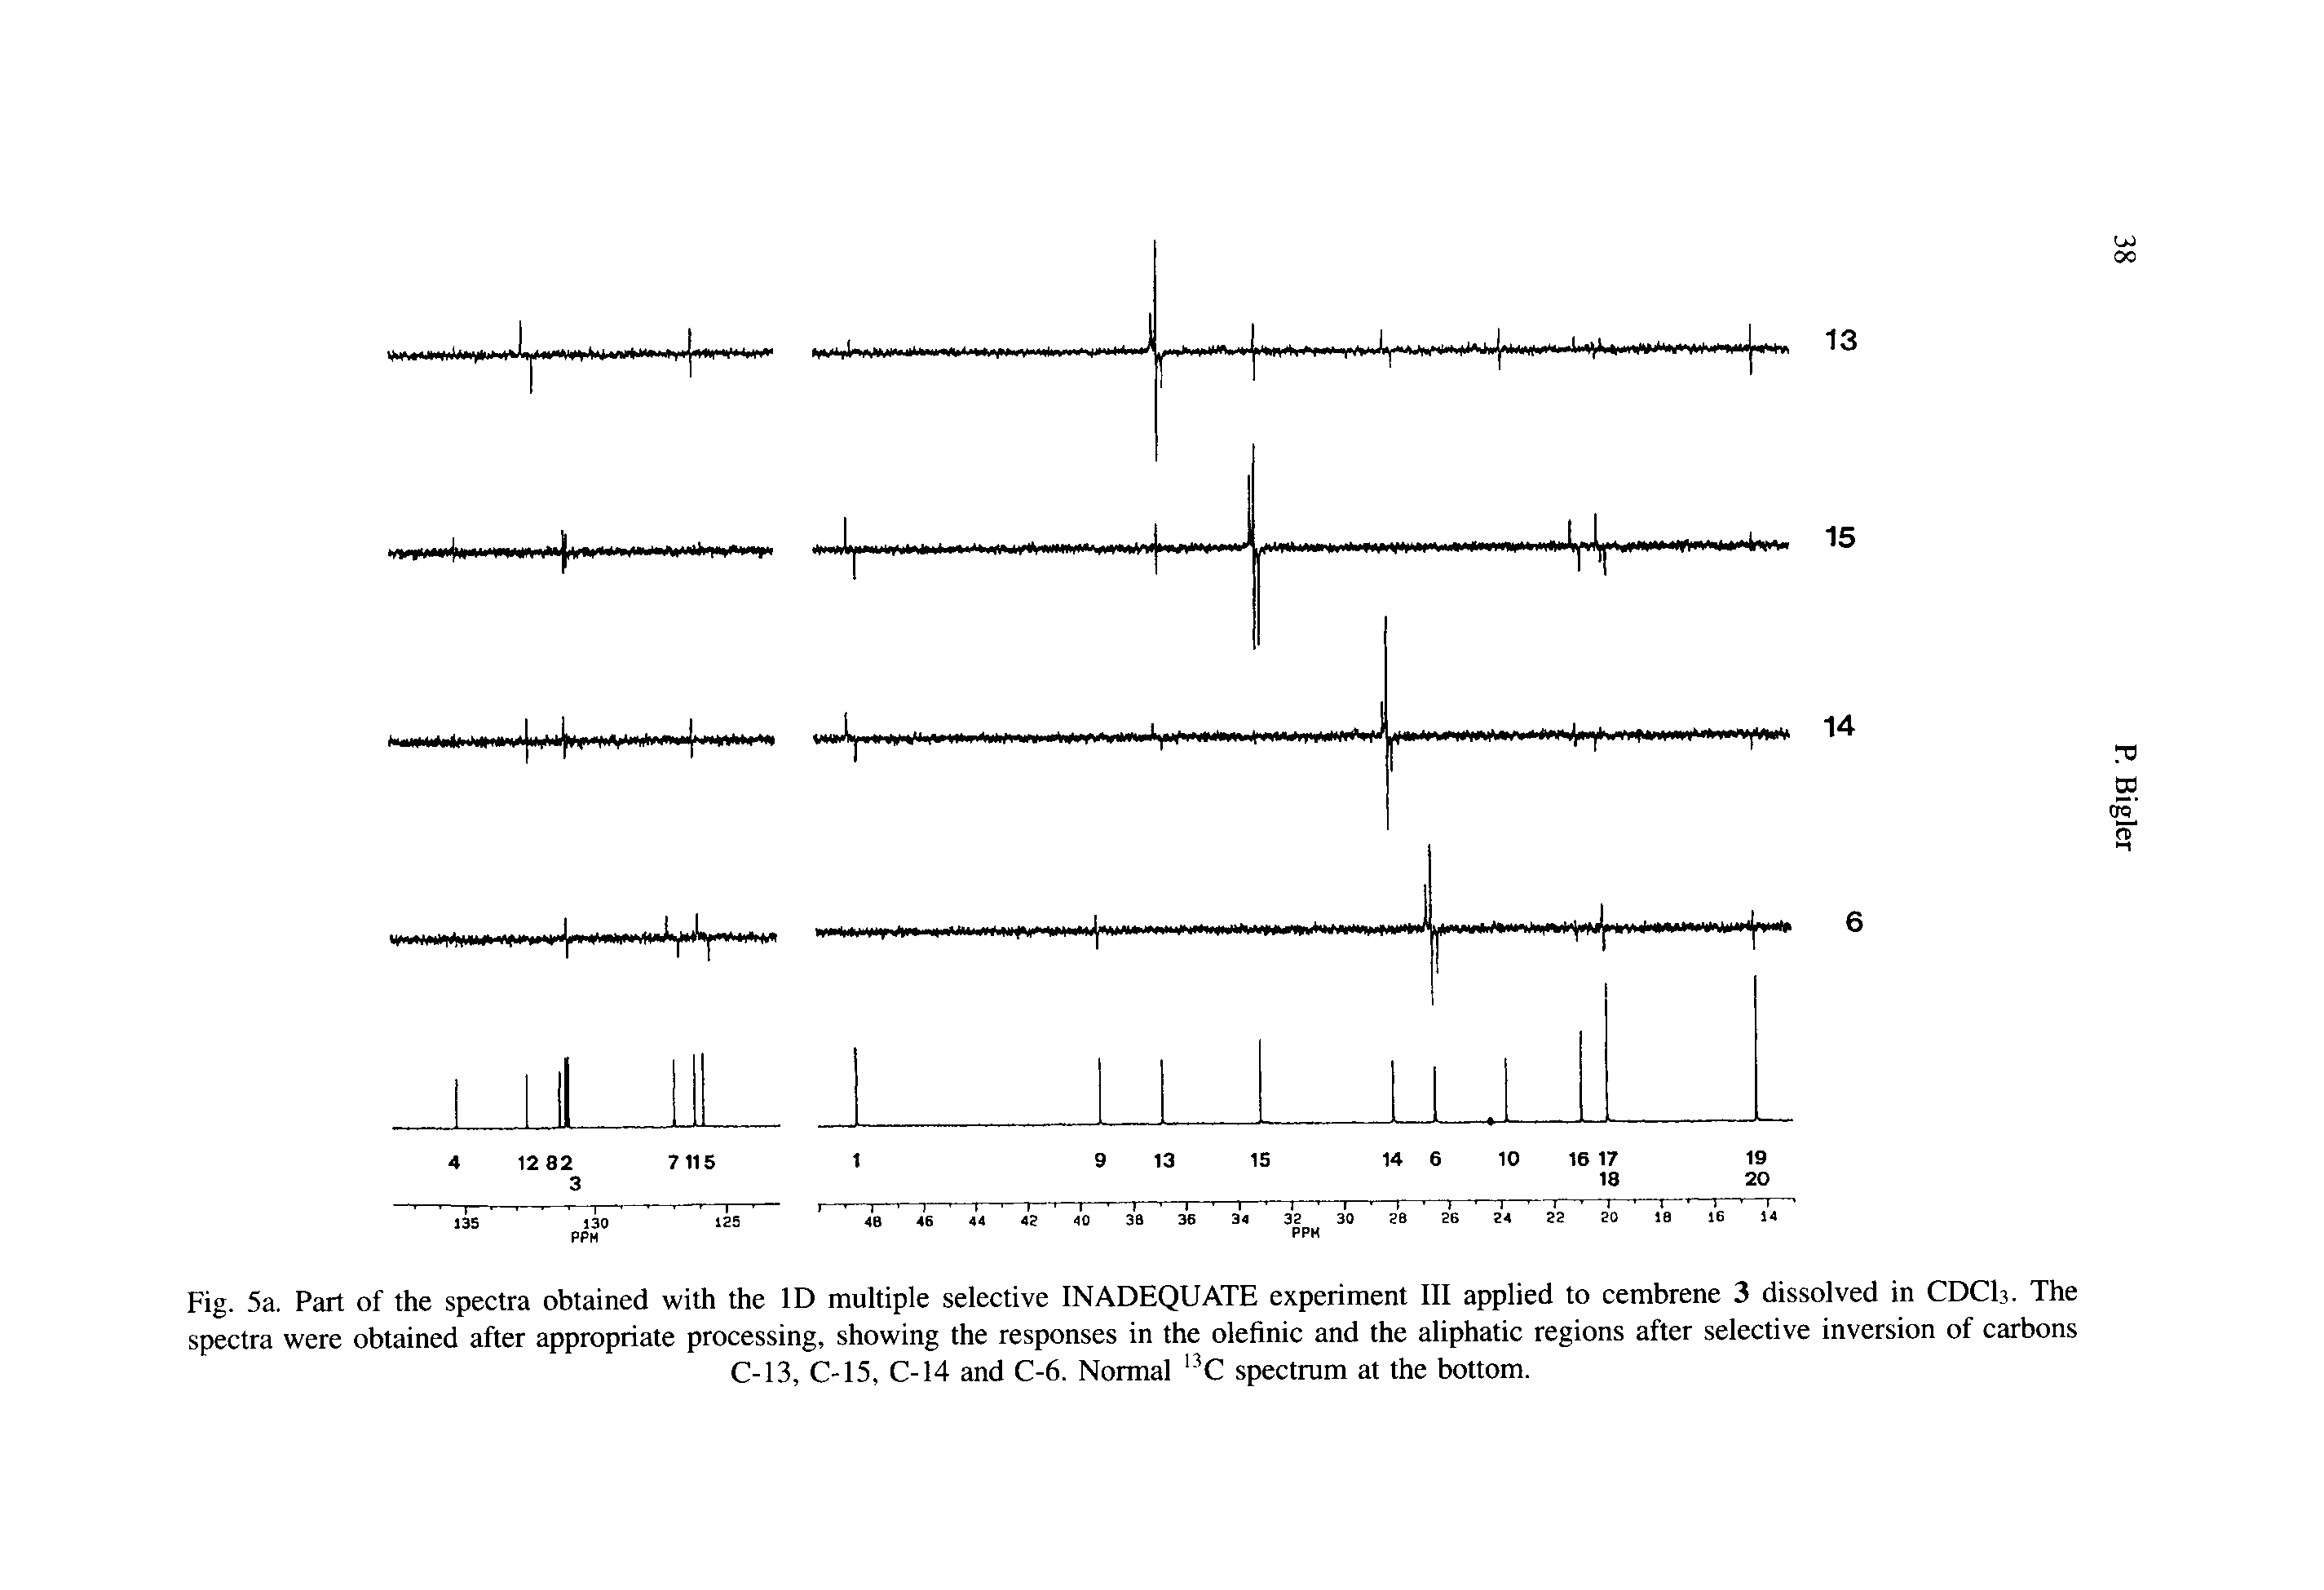 Fig. 5a. Part of the spectra obtained with the ID multiple selective INADEQUATE experiment III applied to cembrene 3 dissolved in CDCI3. The spectra were obtained after appropriate processing, showing the responses in the olefinic and the aliphatic regions after selective inversion of carbons...